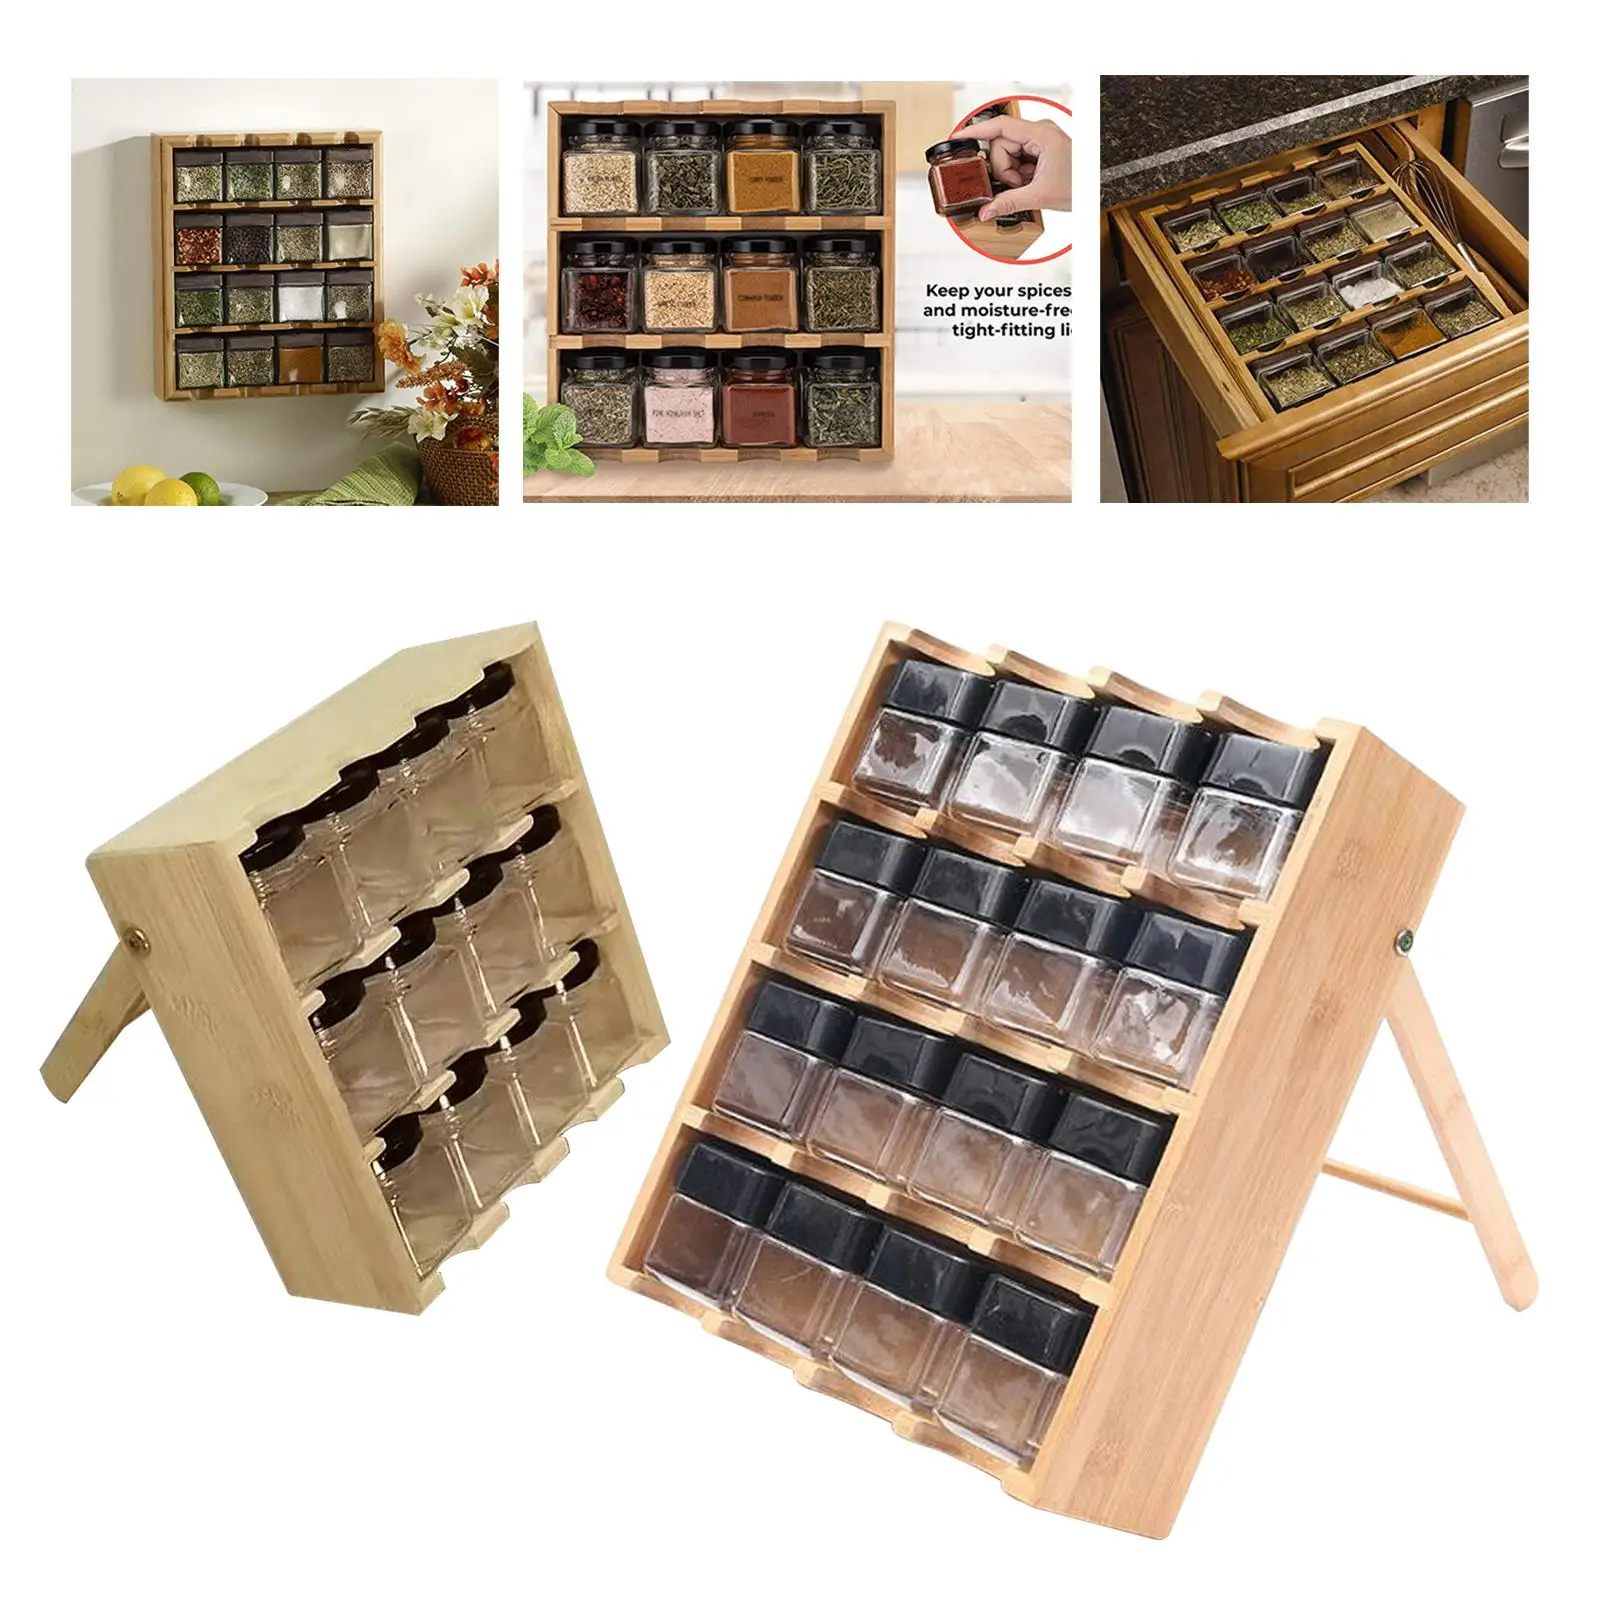 Spice Rack, Multi Tier Wood Free Standing Wall Mount Versatile Eco Friendly Storage Shelf Holder for Countertop Pantry Kitchen